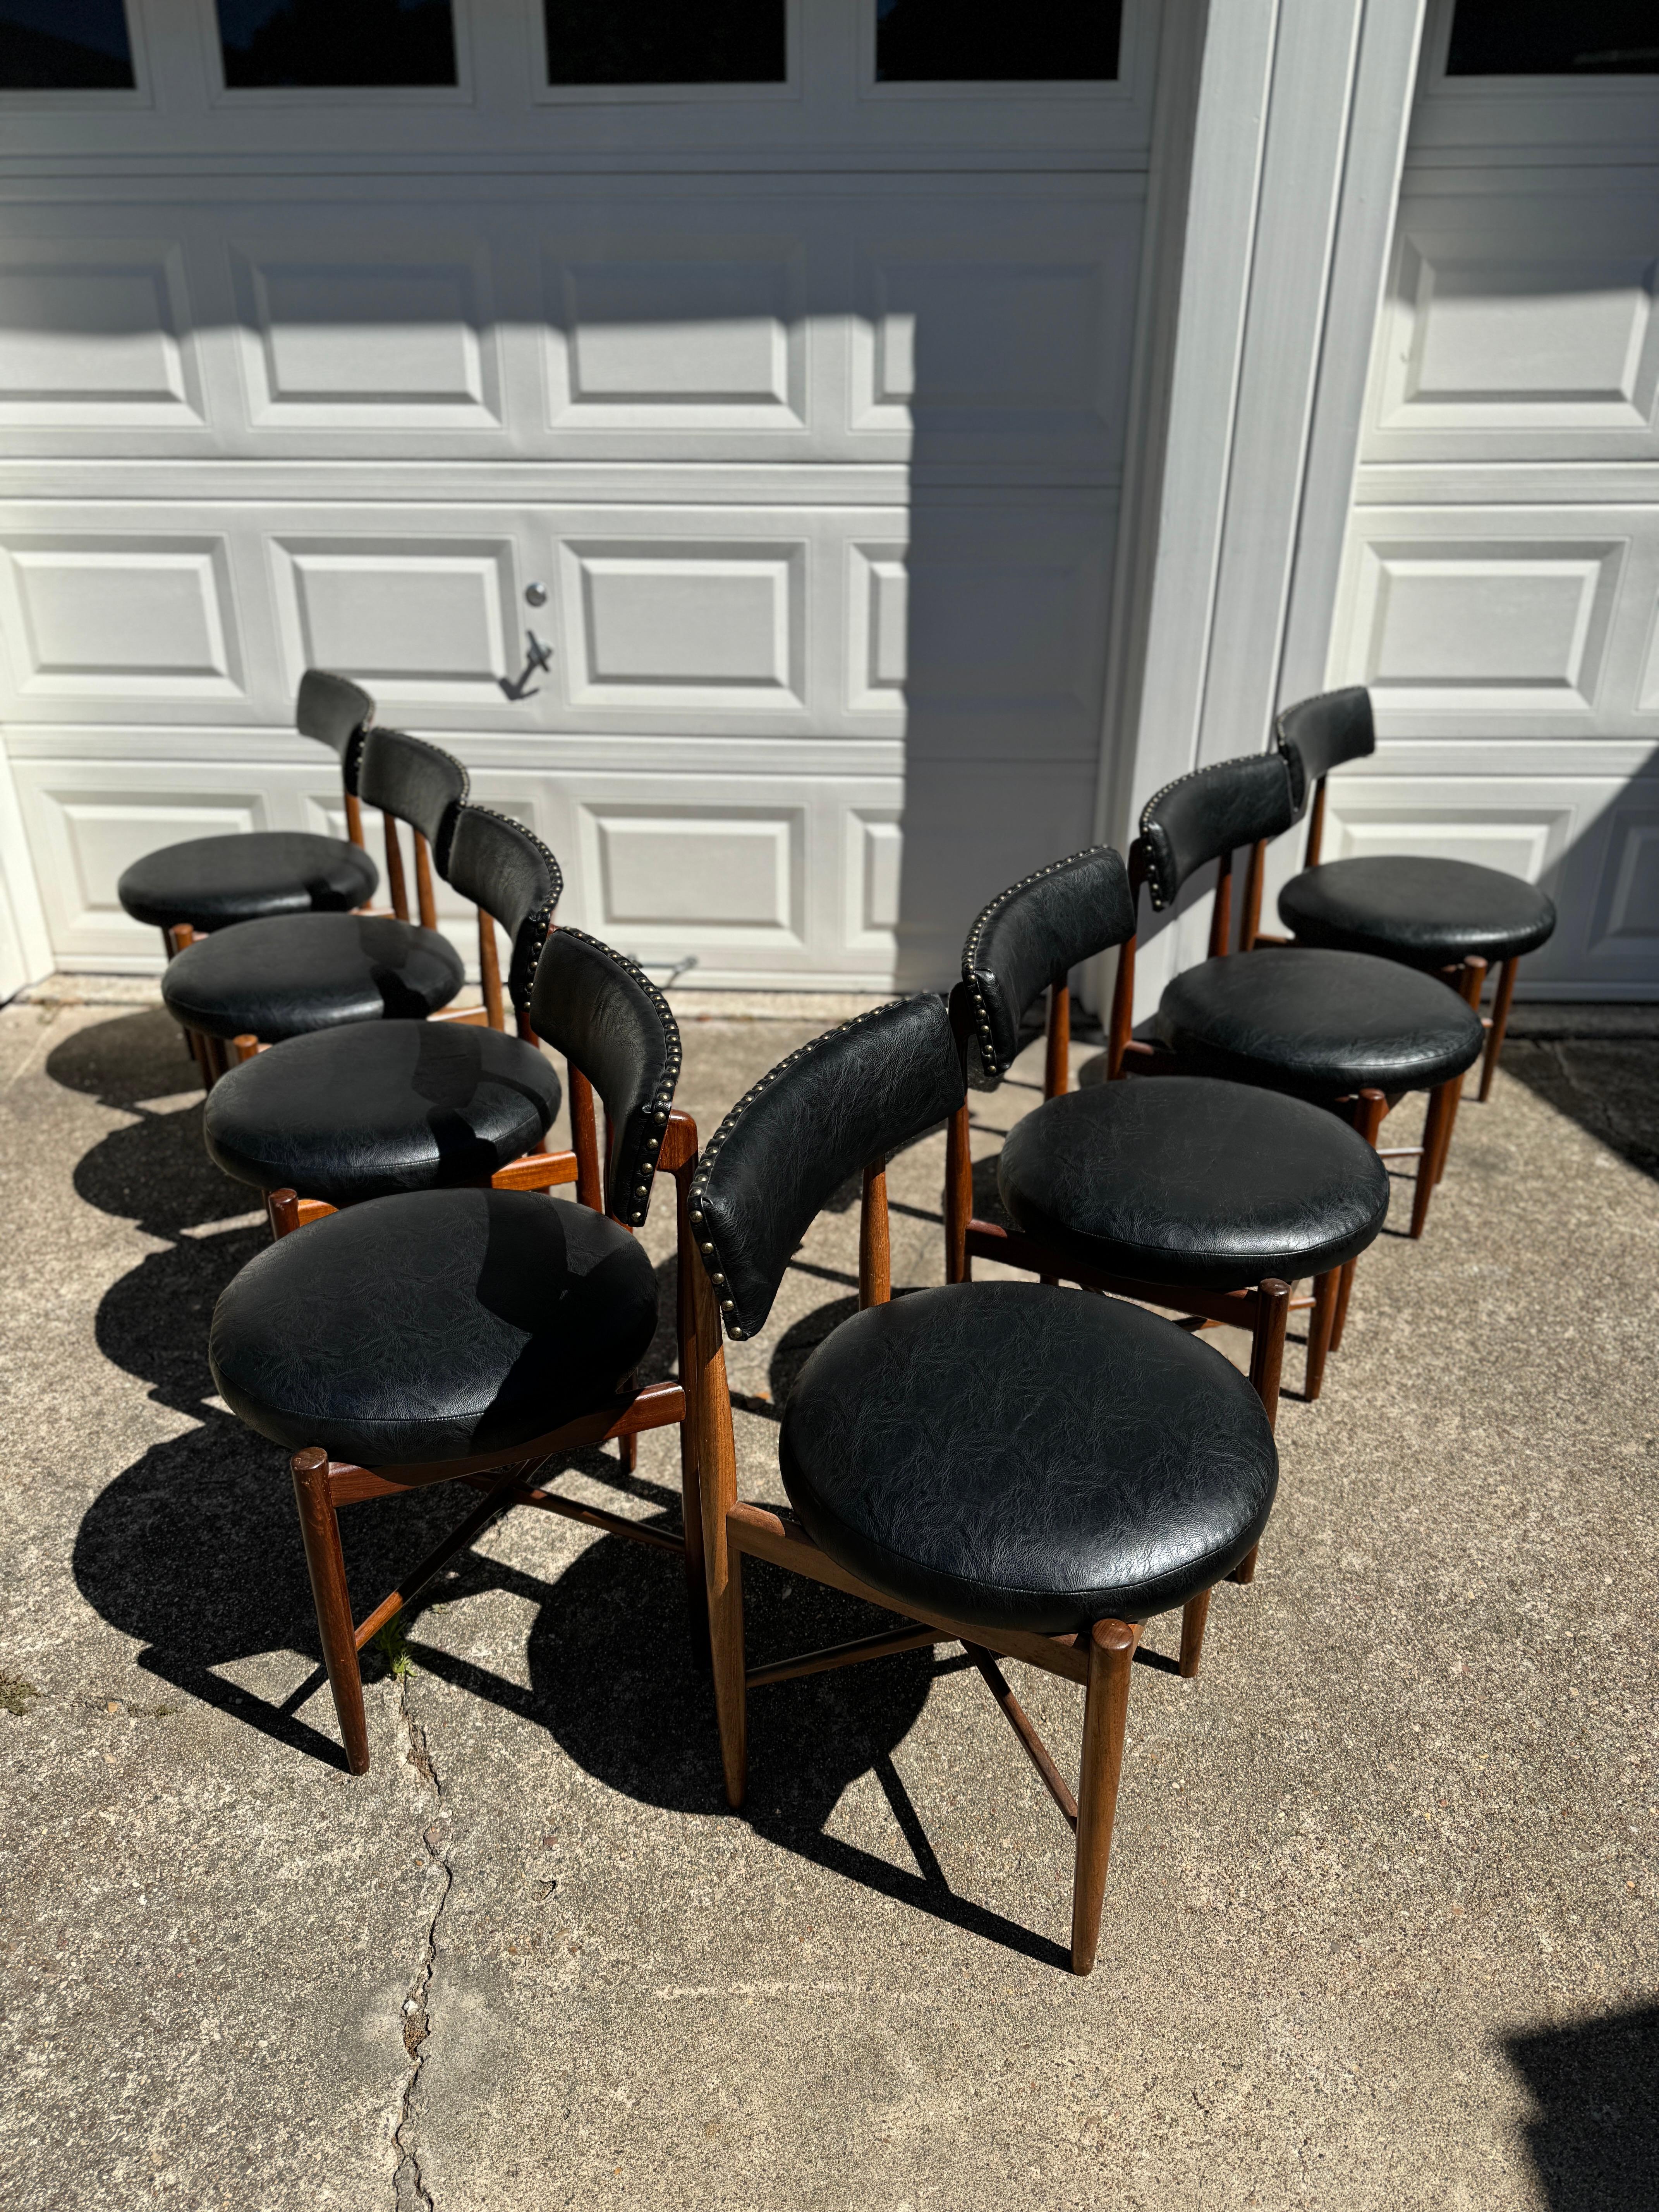 Iconic vintage mid century modern set of 8 dining chairs by Victor Bramwell Wilkins for G plan, circa 1960s. Recently reupholstered in a faux black leather. Frames are structurally sound and all original. Overall in very good condition. 

30” H x